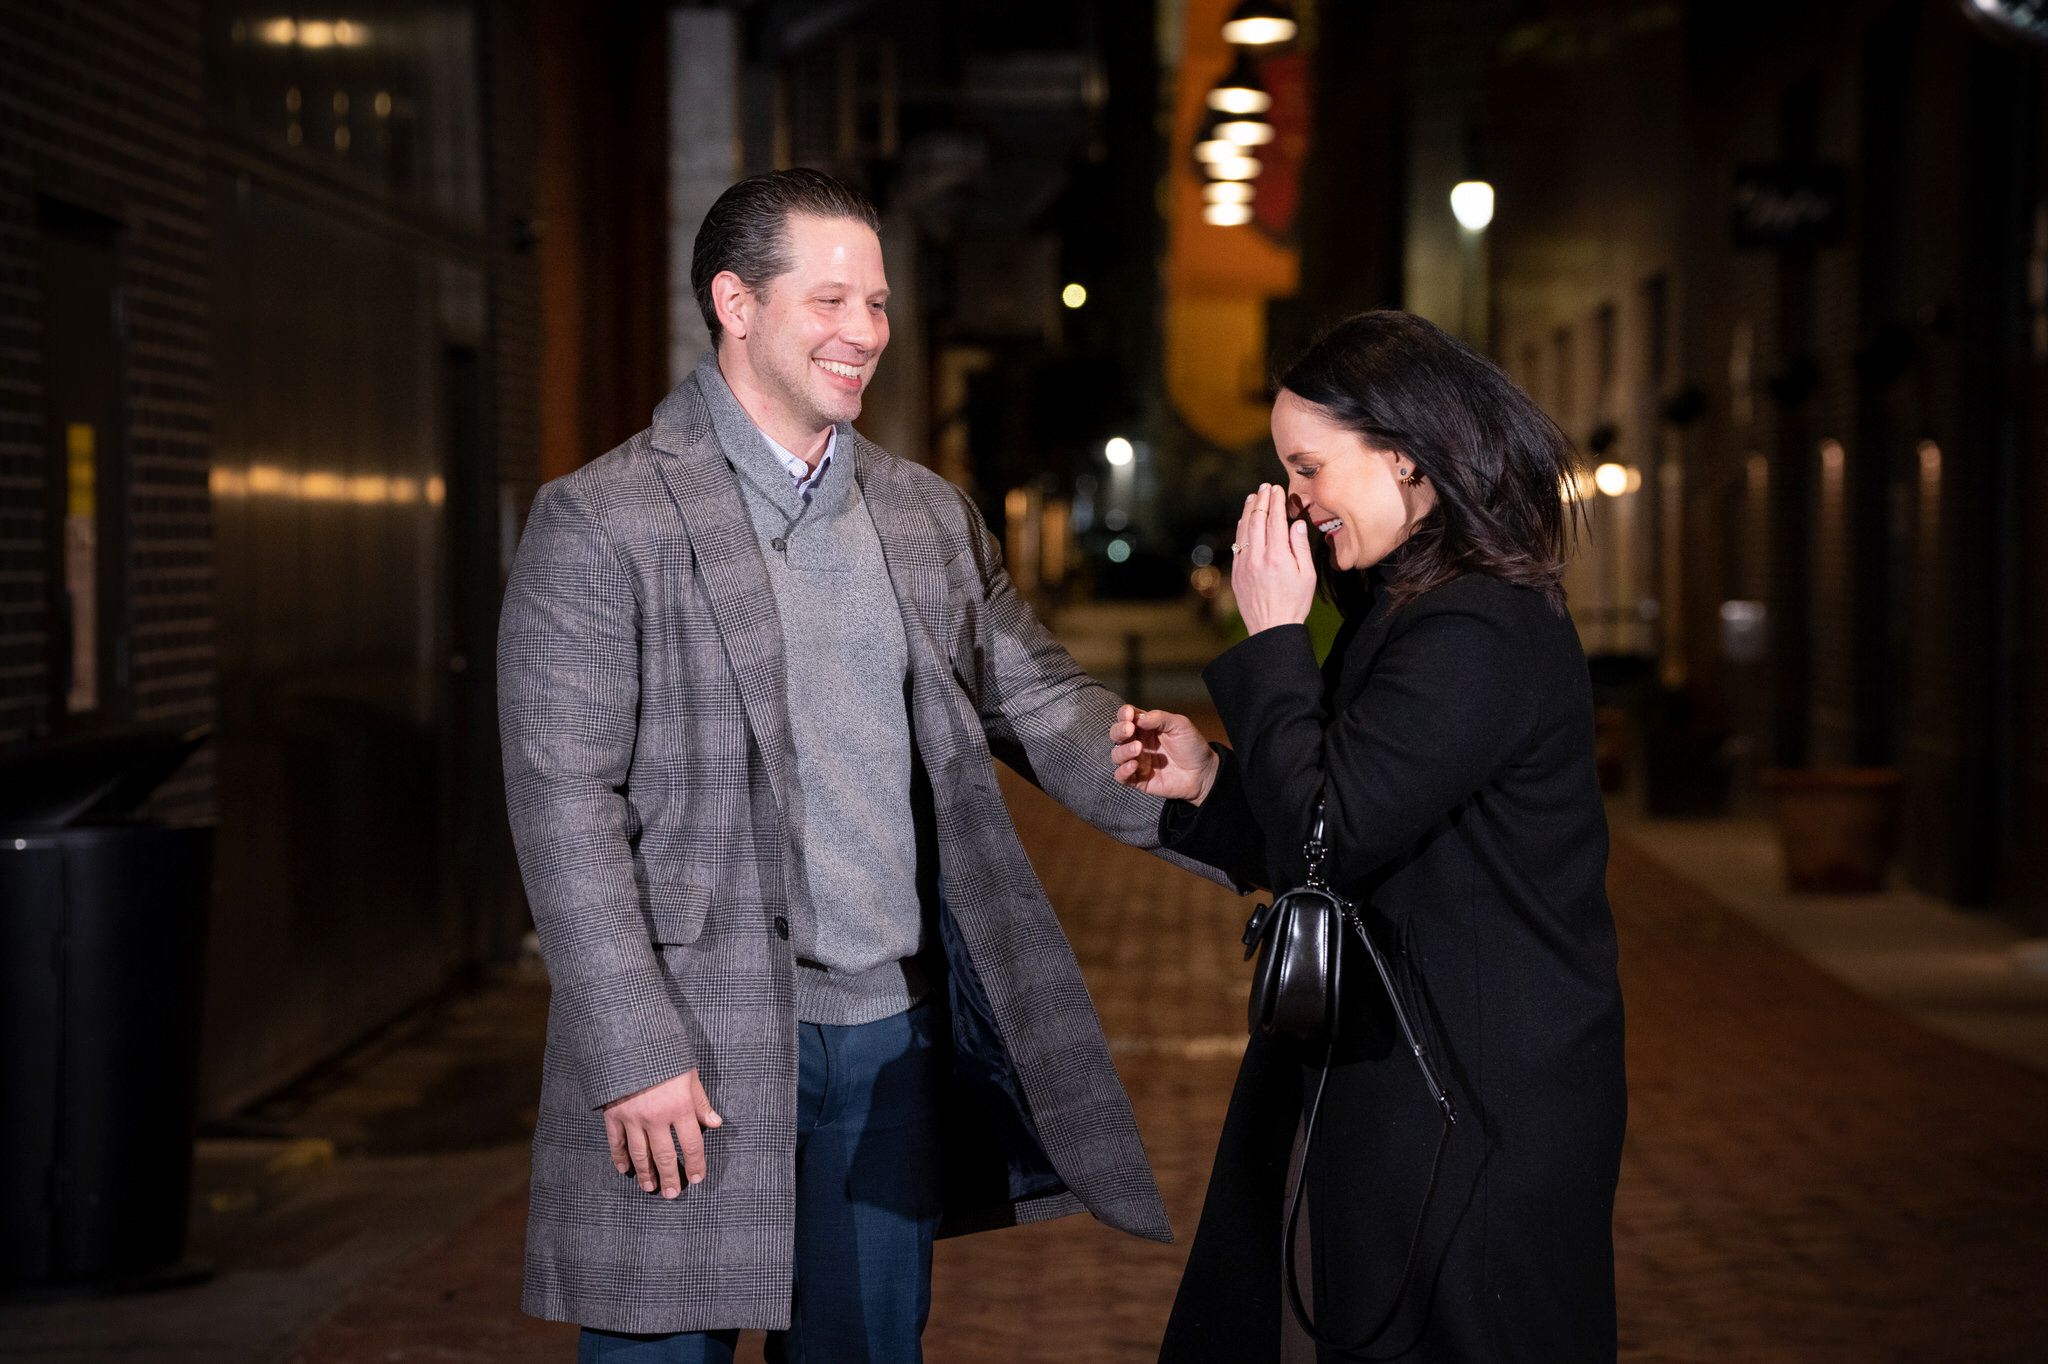 A fiance reacts after becoming engaged during a proposal in Parker's Alley.